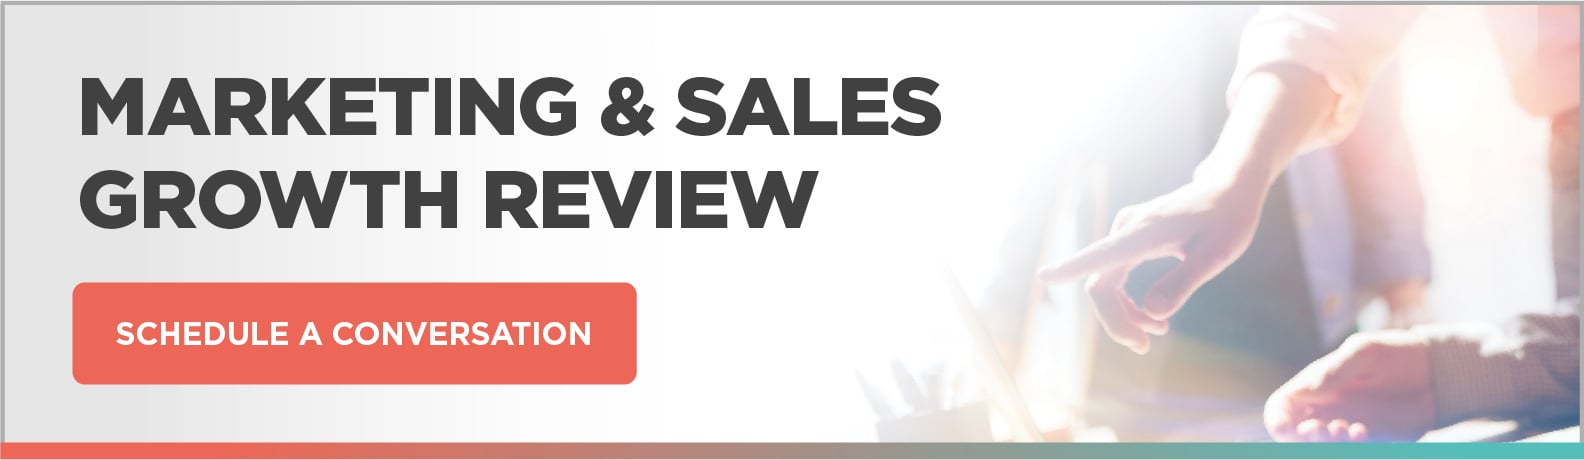 Marketing and Sales Growth Review Conversation